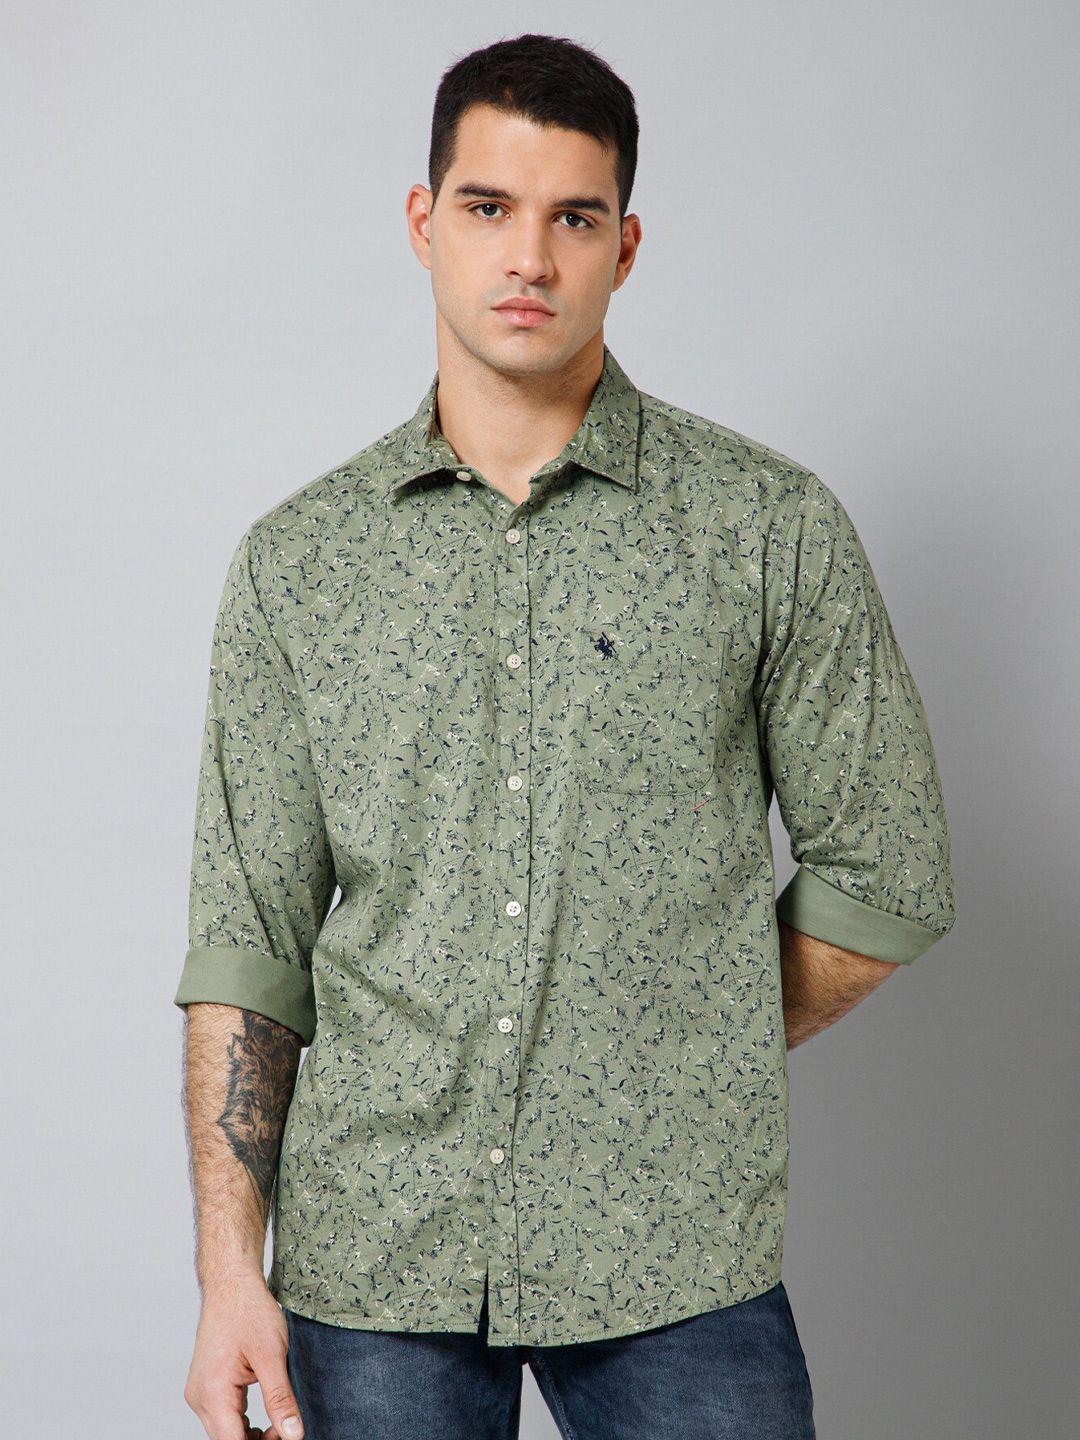 cantabil-abstract-printed-comfort-cotton-casual-shirt